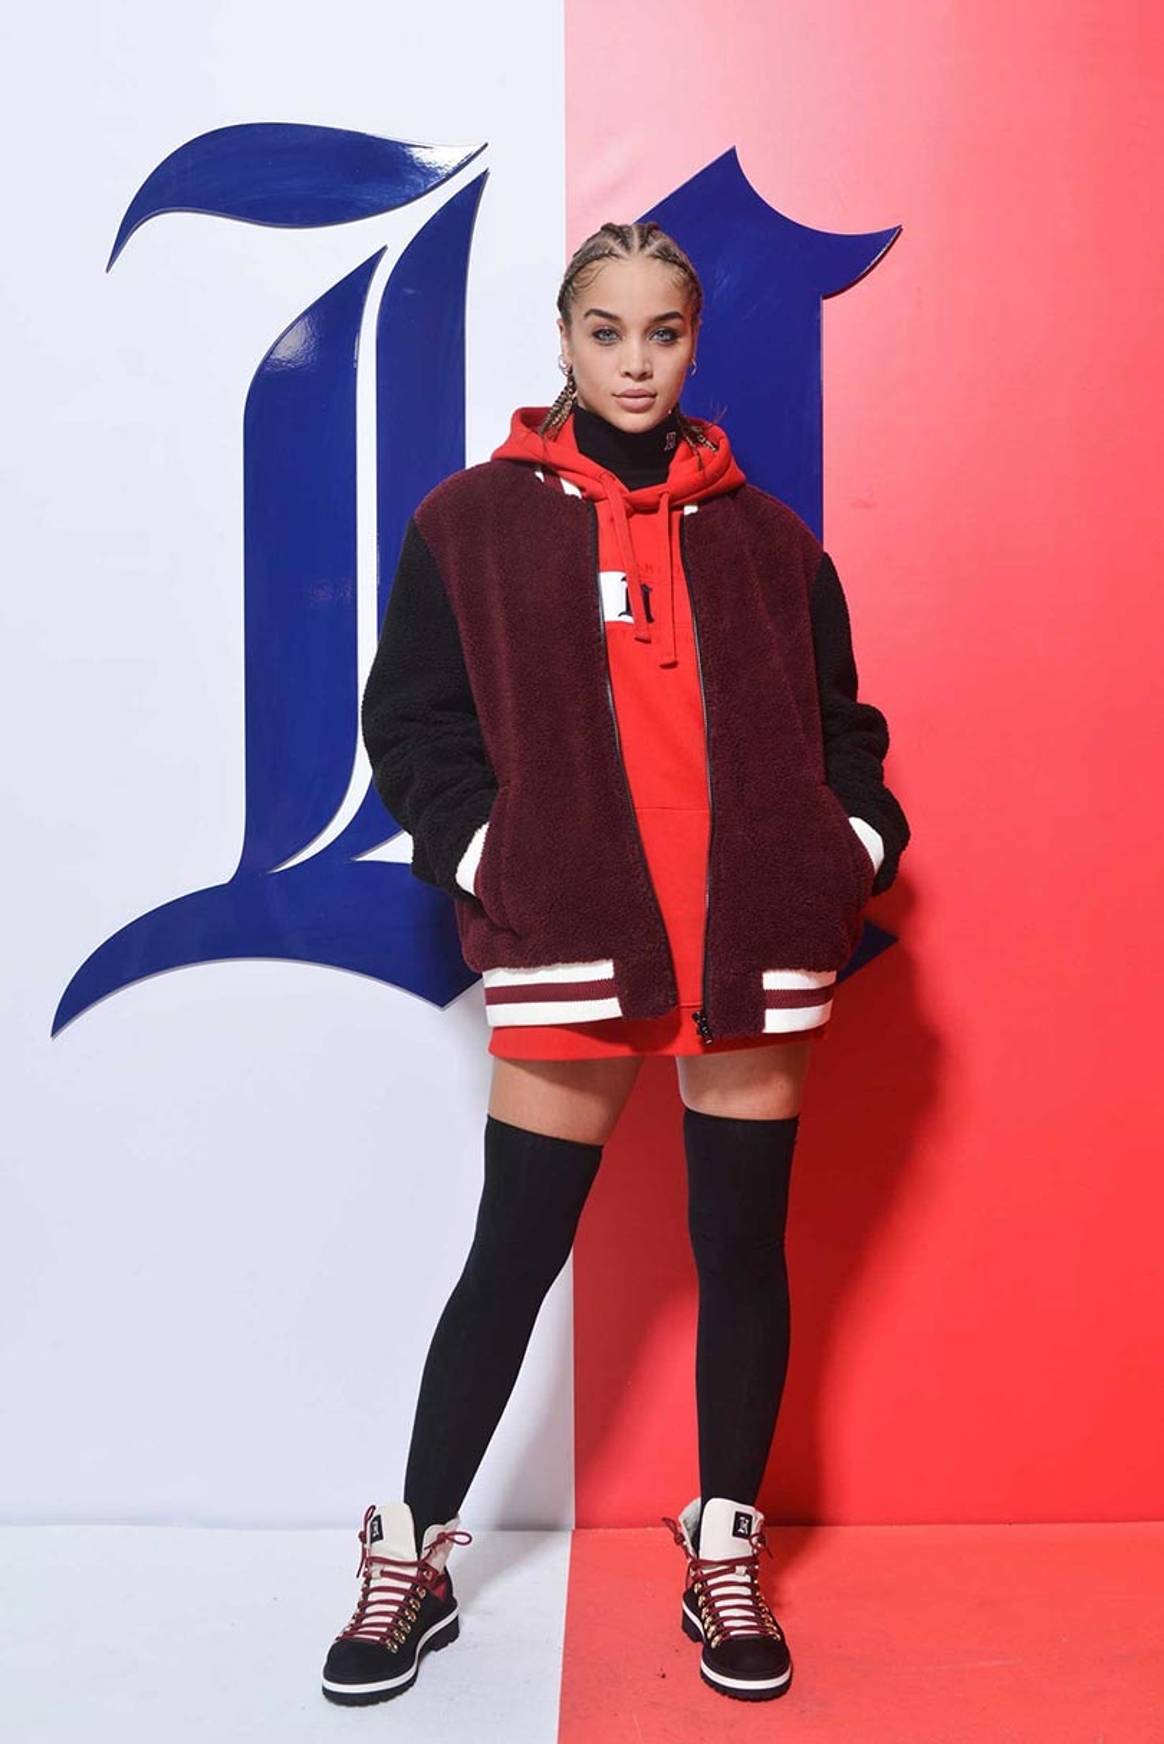 Tommy Hilfiger and Lewis Hamilton present Fall 2019 TOMMYXLEWIS collaborative collection in Milan